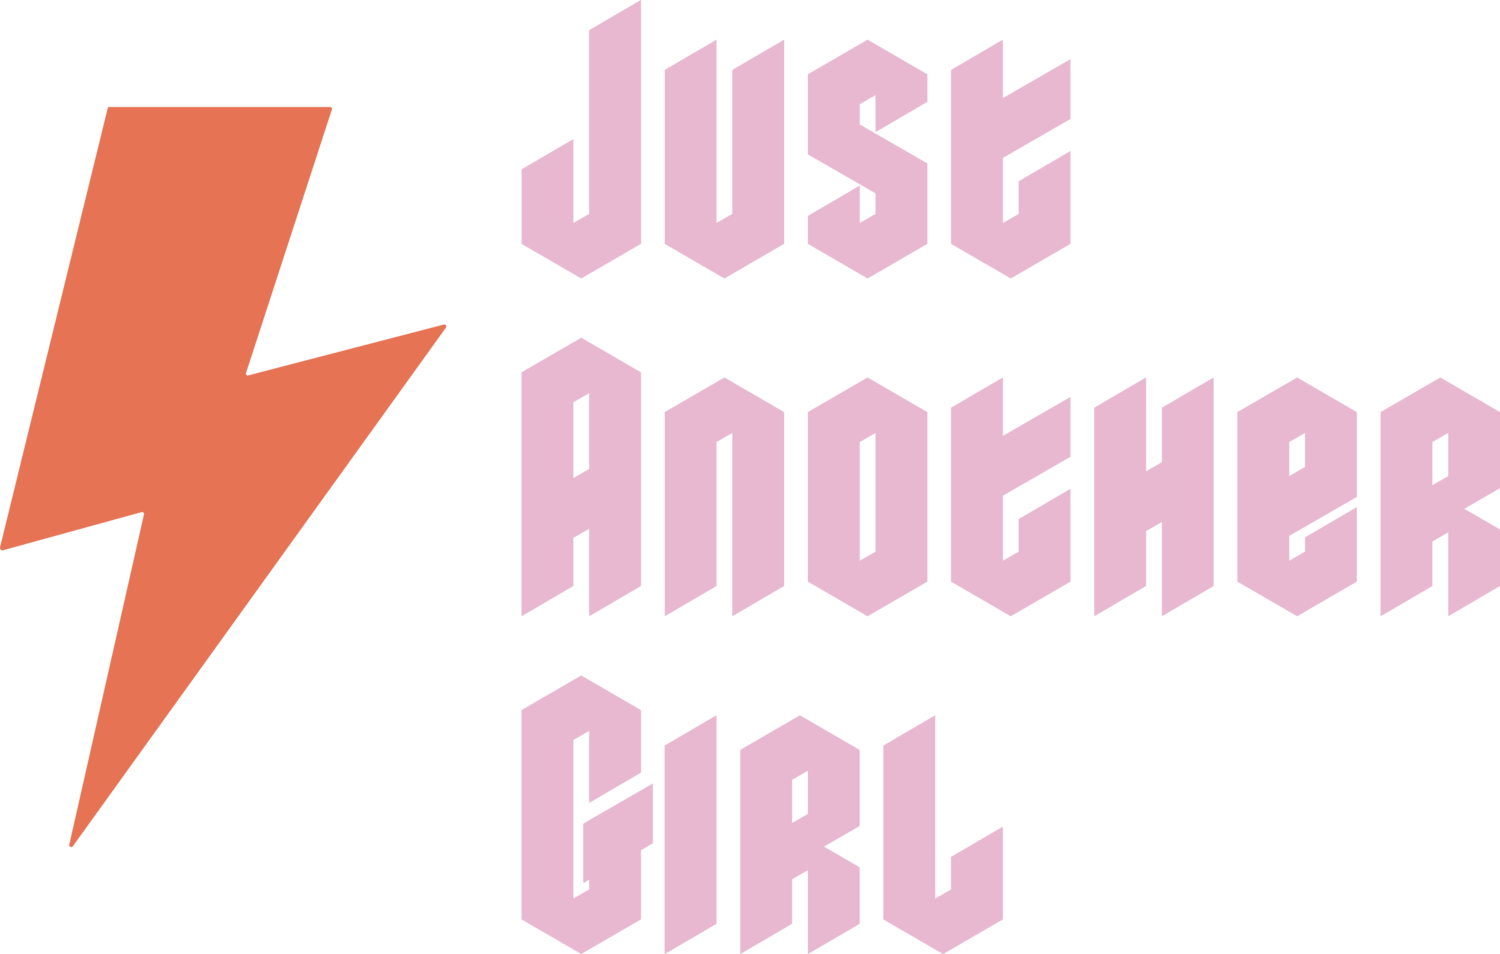 Just Another Girl